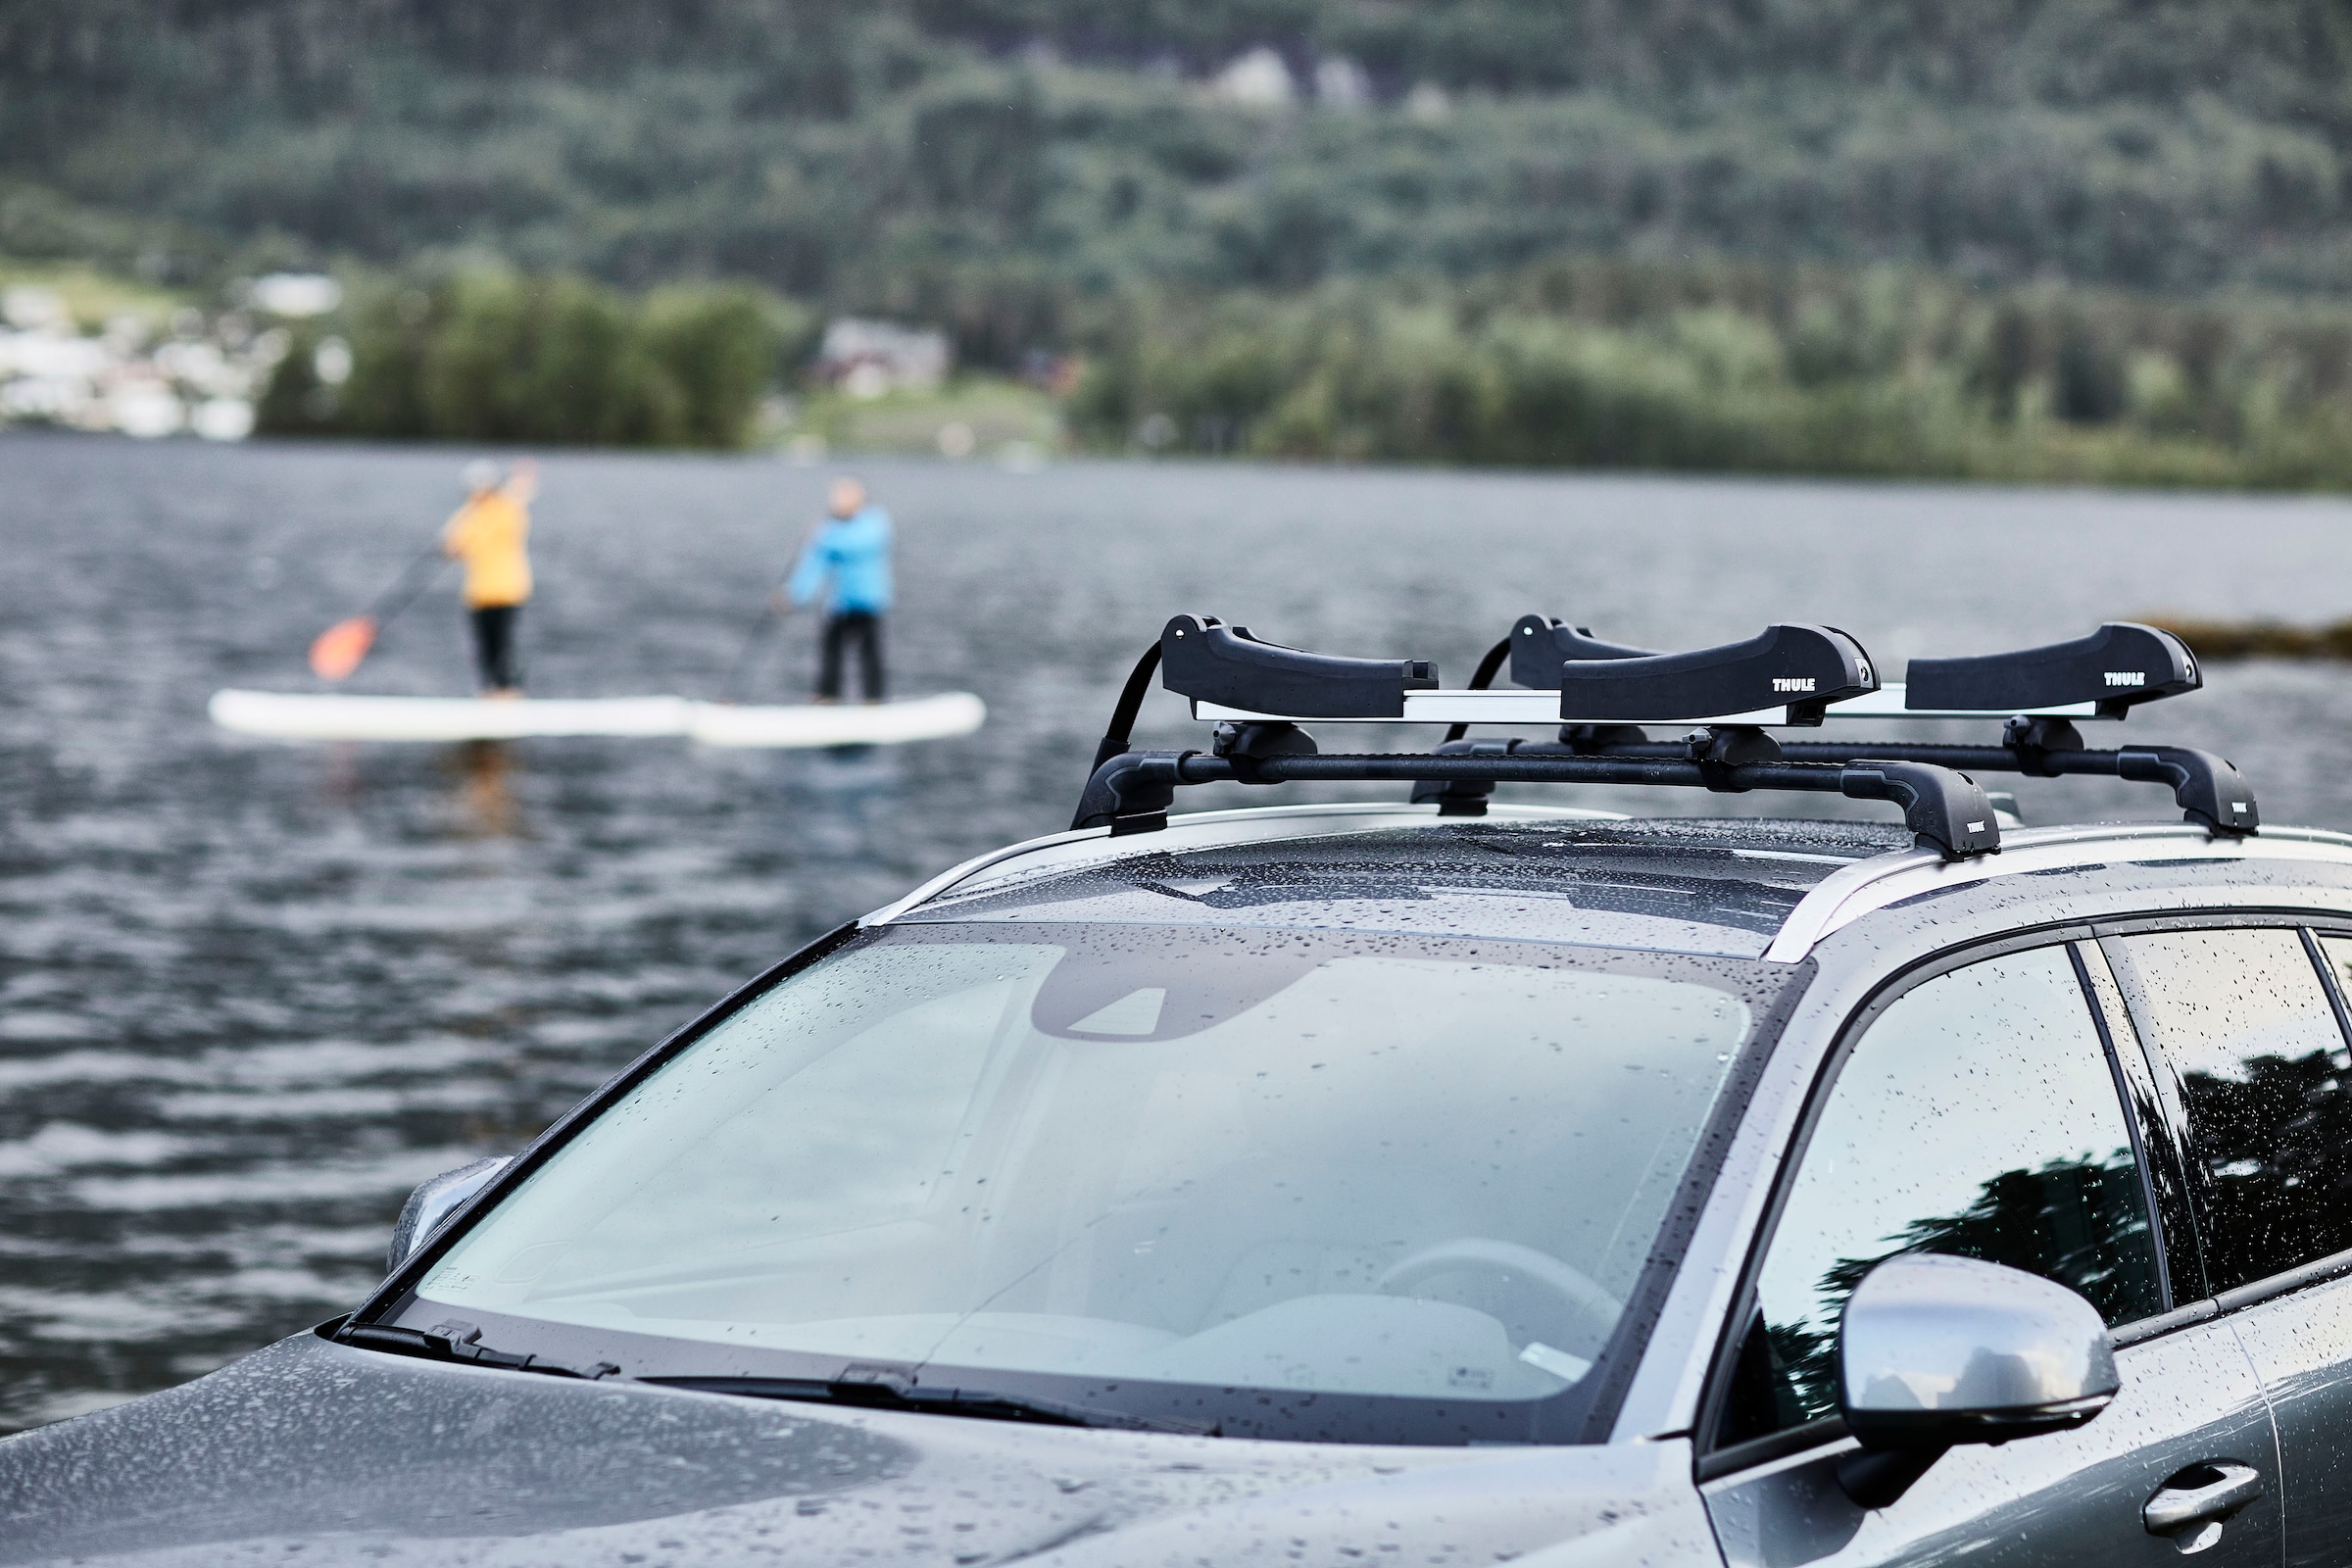 Thule Dachträger »SUP Taxi XT«, für SUP-Boards